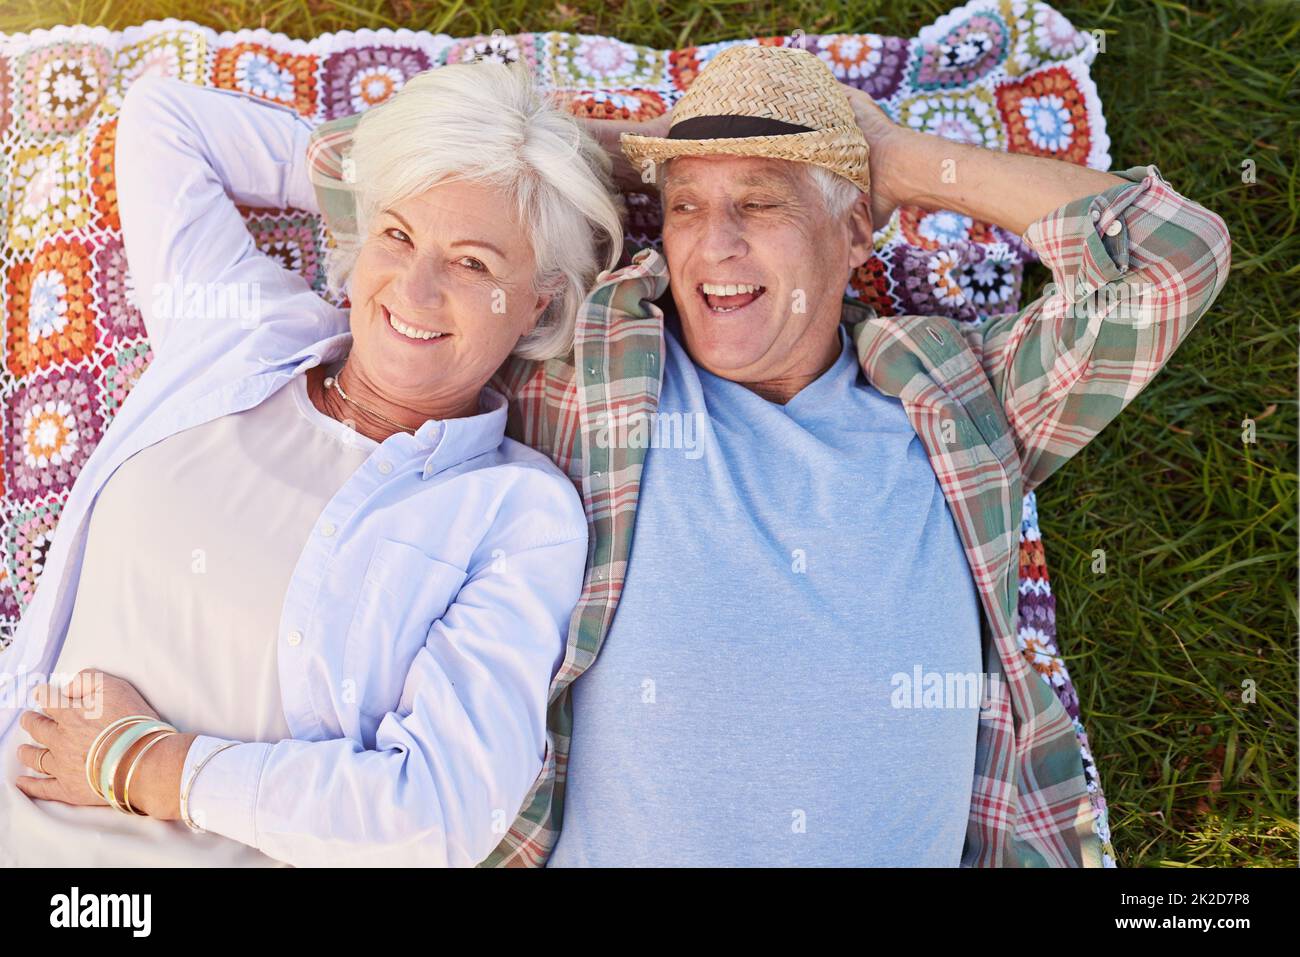 This is one relaxing retirement. Portrait of a happy senior couple relaxing together on the lawn. Stock Photo